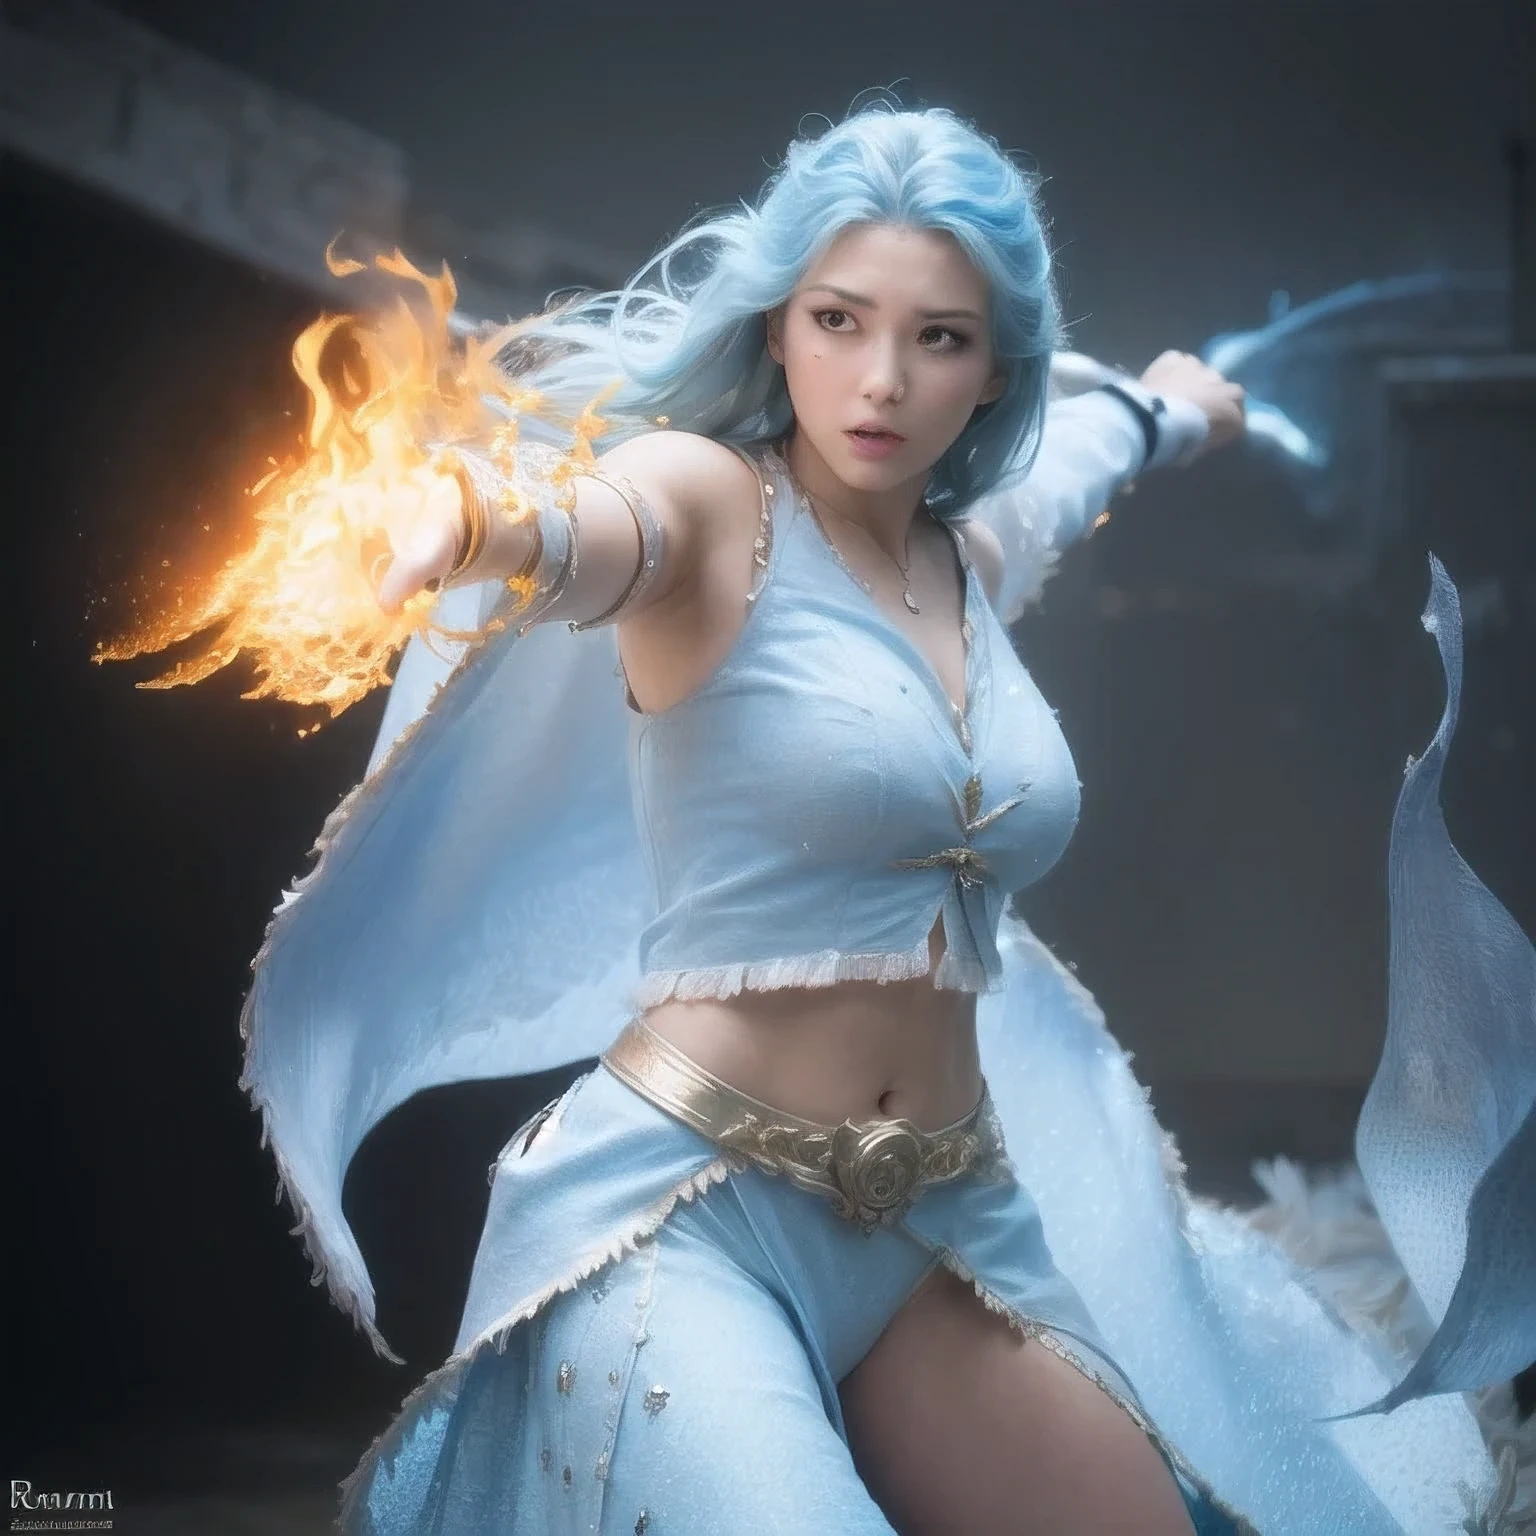 there is a woman with blue hair and a white dress holding a fire, ice sorceress, the sorceress casting a fireball, fantasy character photo, casting fire spell, (octane render) fantasy style, ice and fire, a sorceress casting a ice ball, realistic fantasy render, she has fire powers, ice mage, fantasy photoshoot